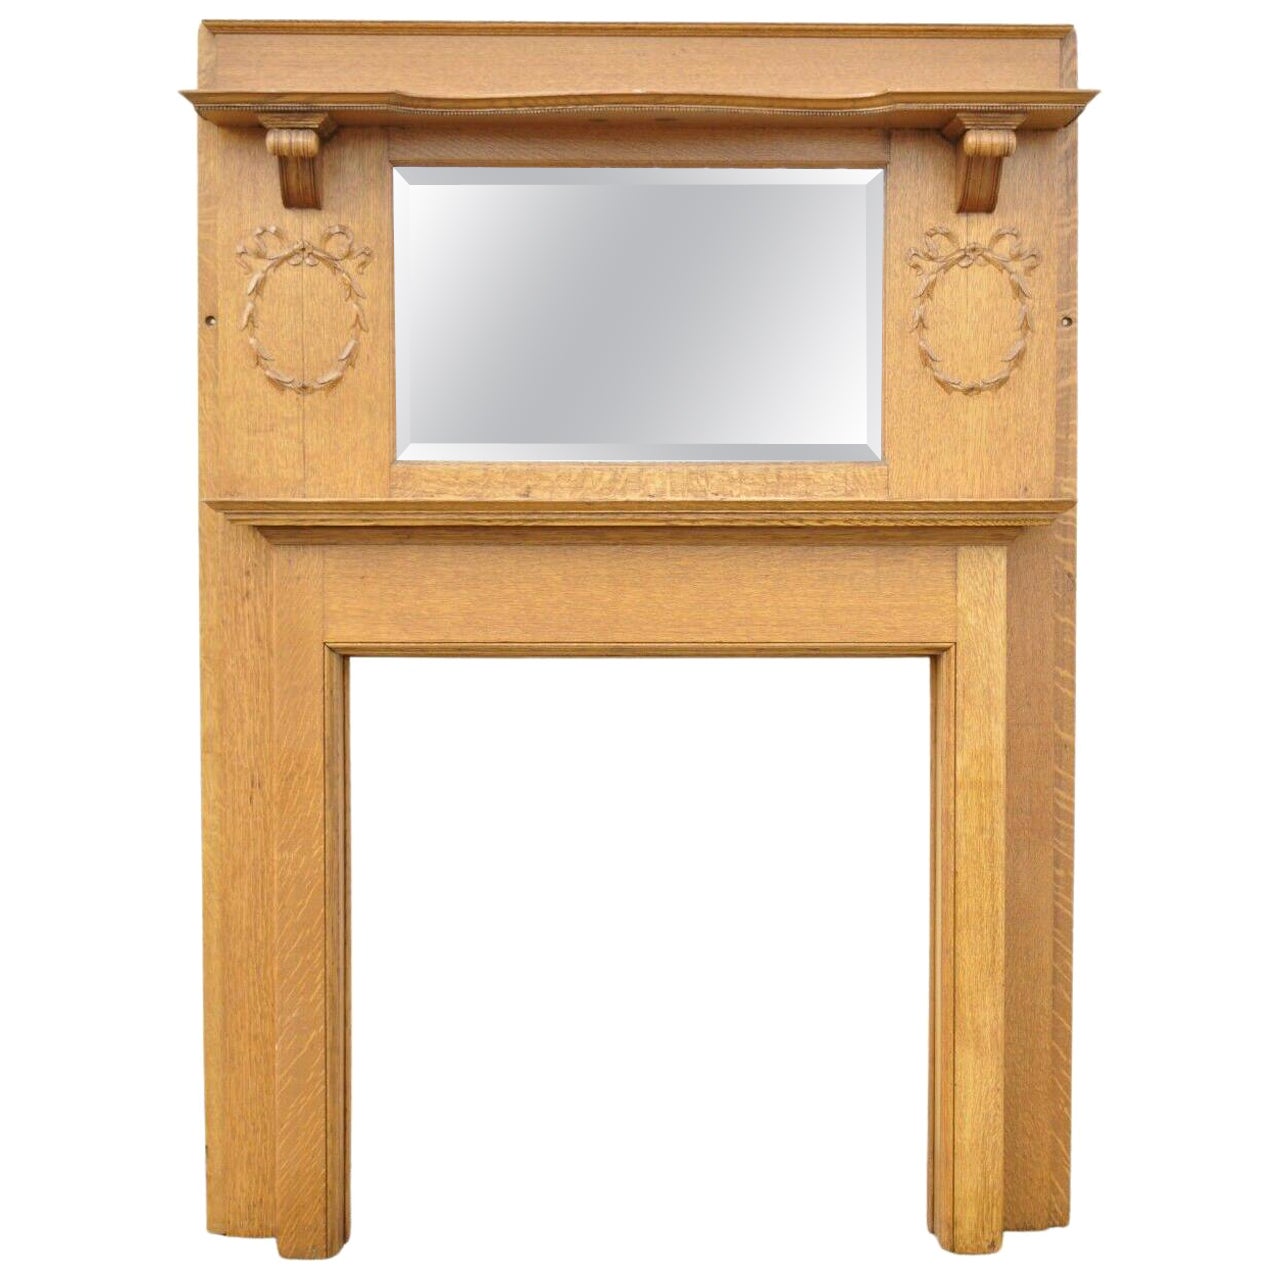 Antique American Victorian Golden Oak Wood Fireplace Mantel with Beveled Mirror